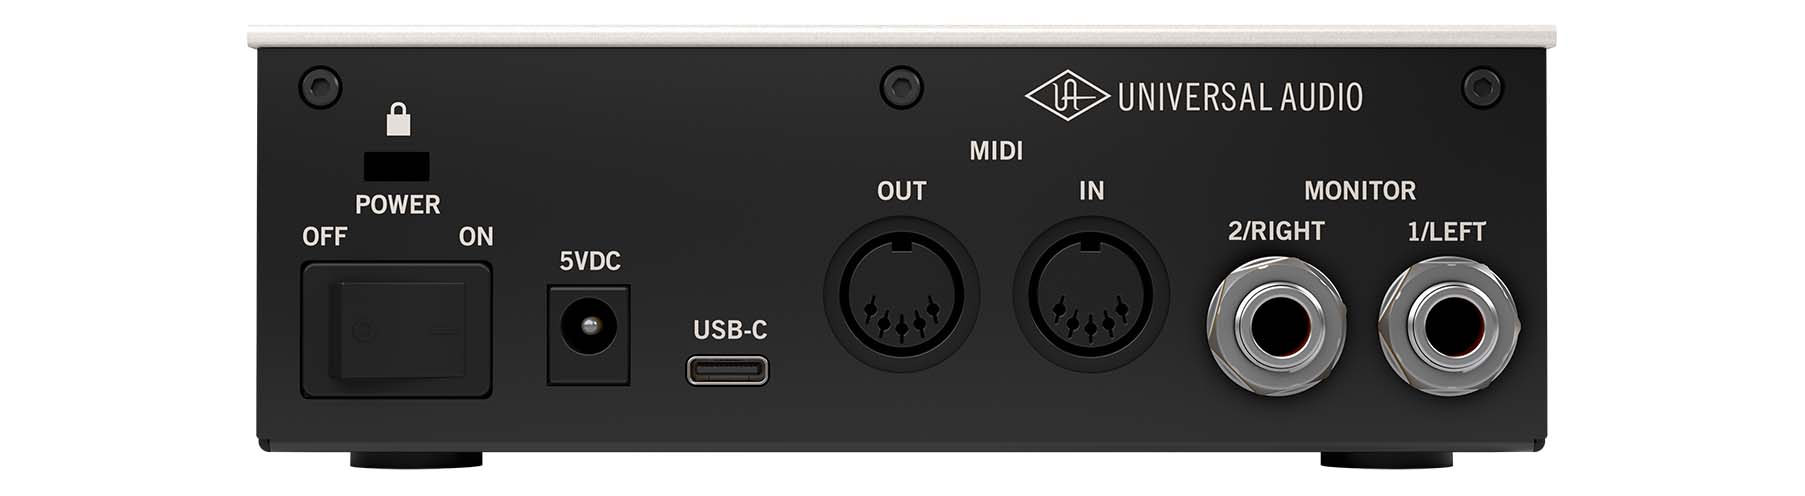 Universal Audio VOLT1 - 1-in/2-out USB 2.0 Audio Interface (FREE Plugins)